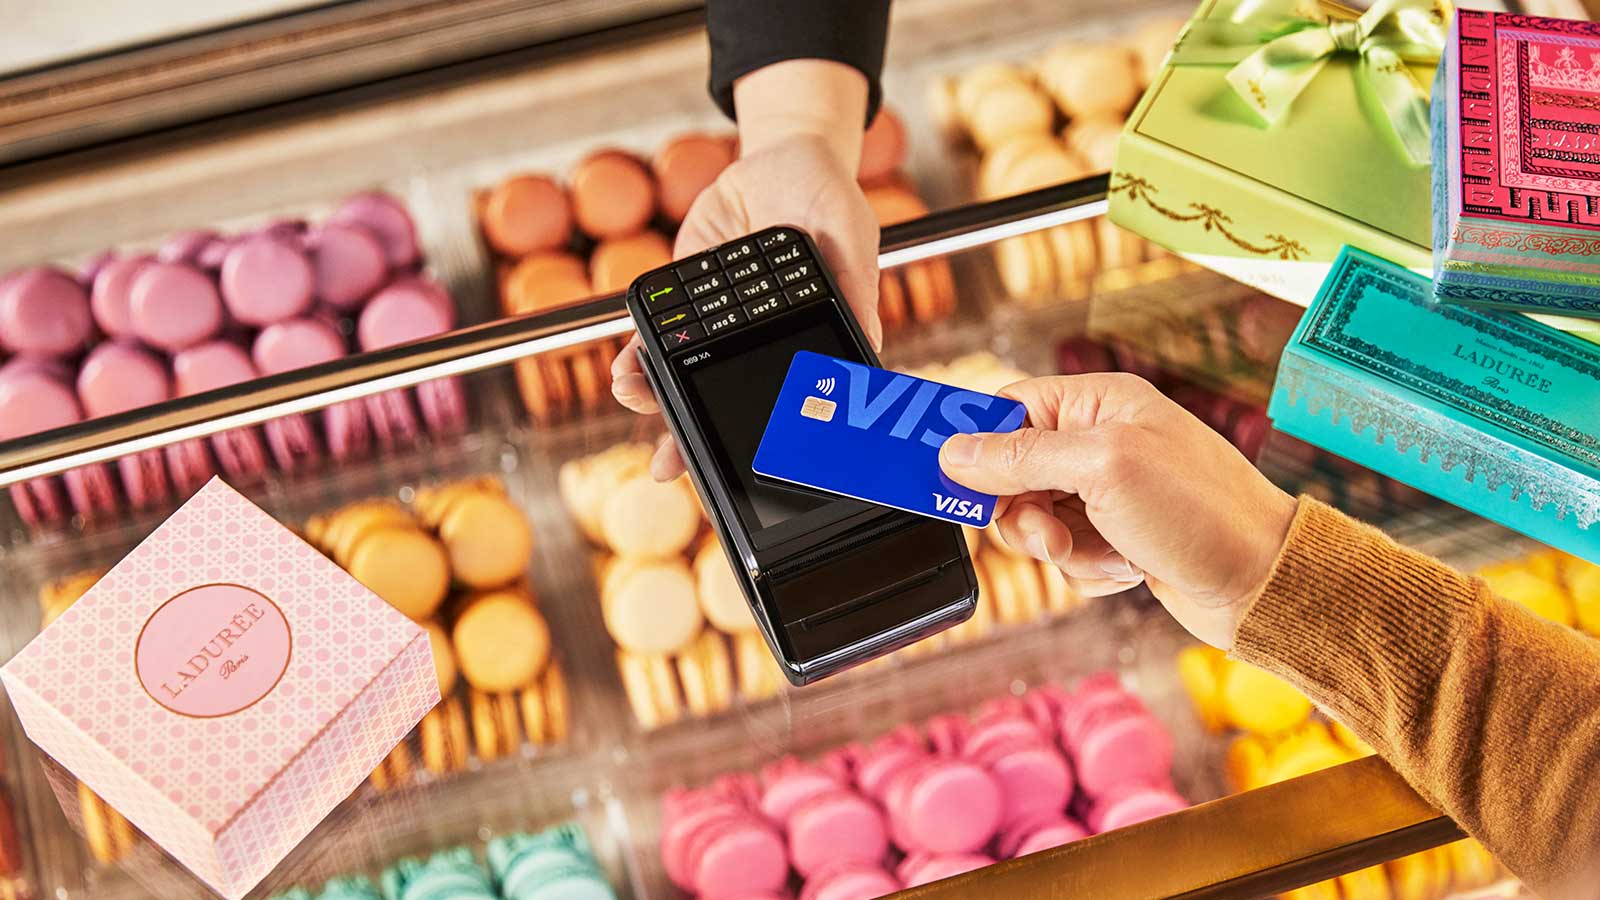 A display of cookies is visible in the background as a person holds up a Visa contactless payment card for payment. 